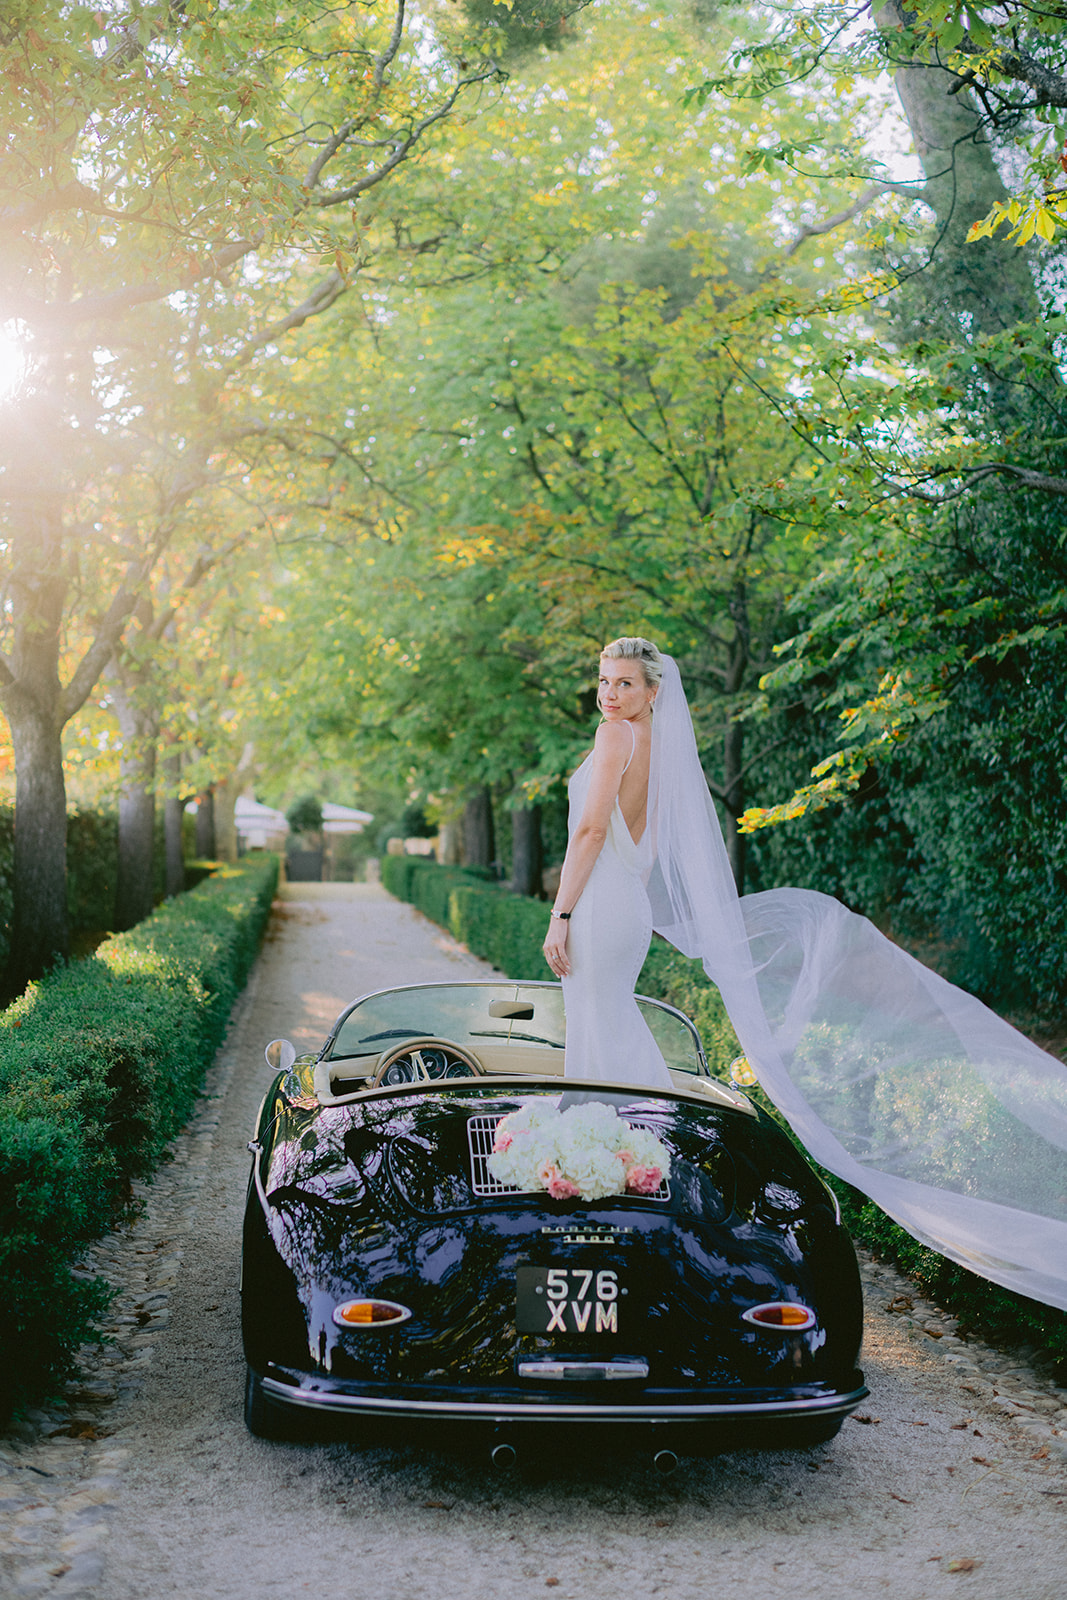 the bride is standing on the car and posing with her veil